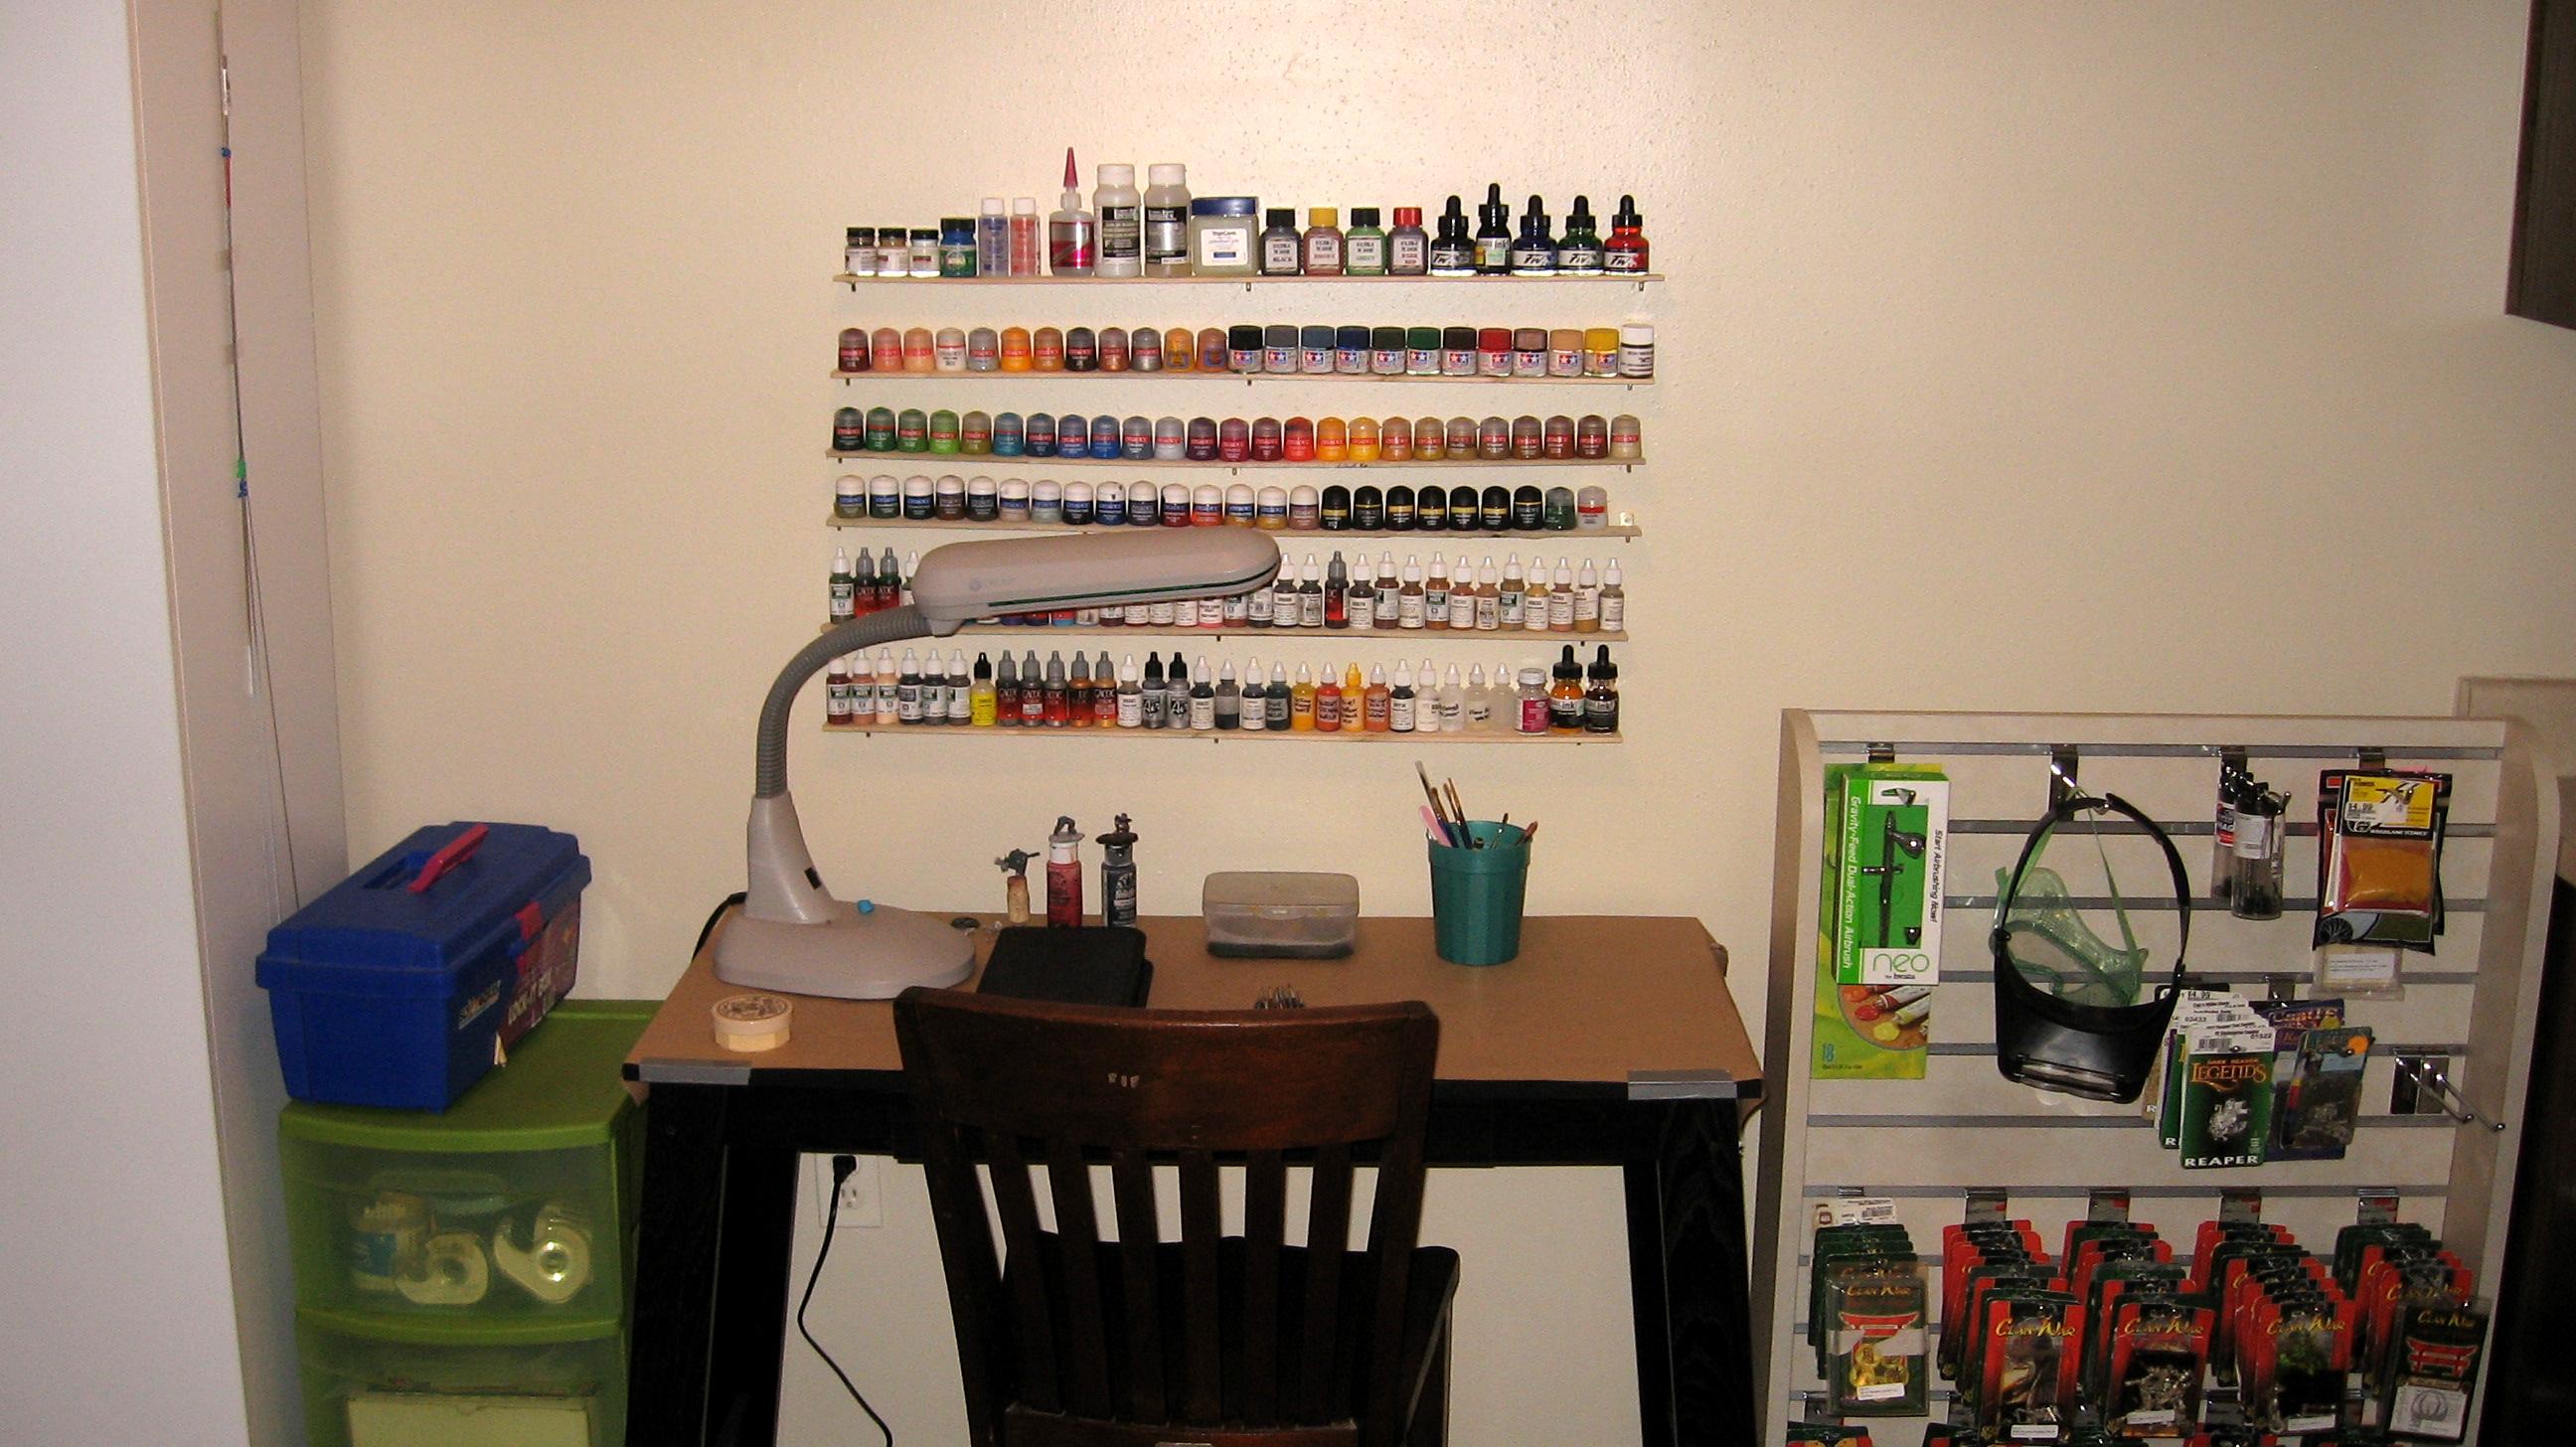 Area, Craft, Desk, Hobby, Nook, Painting